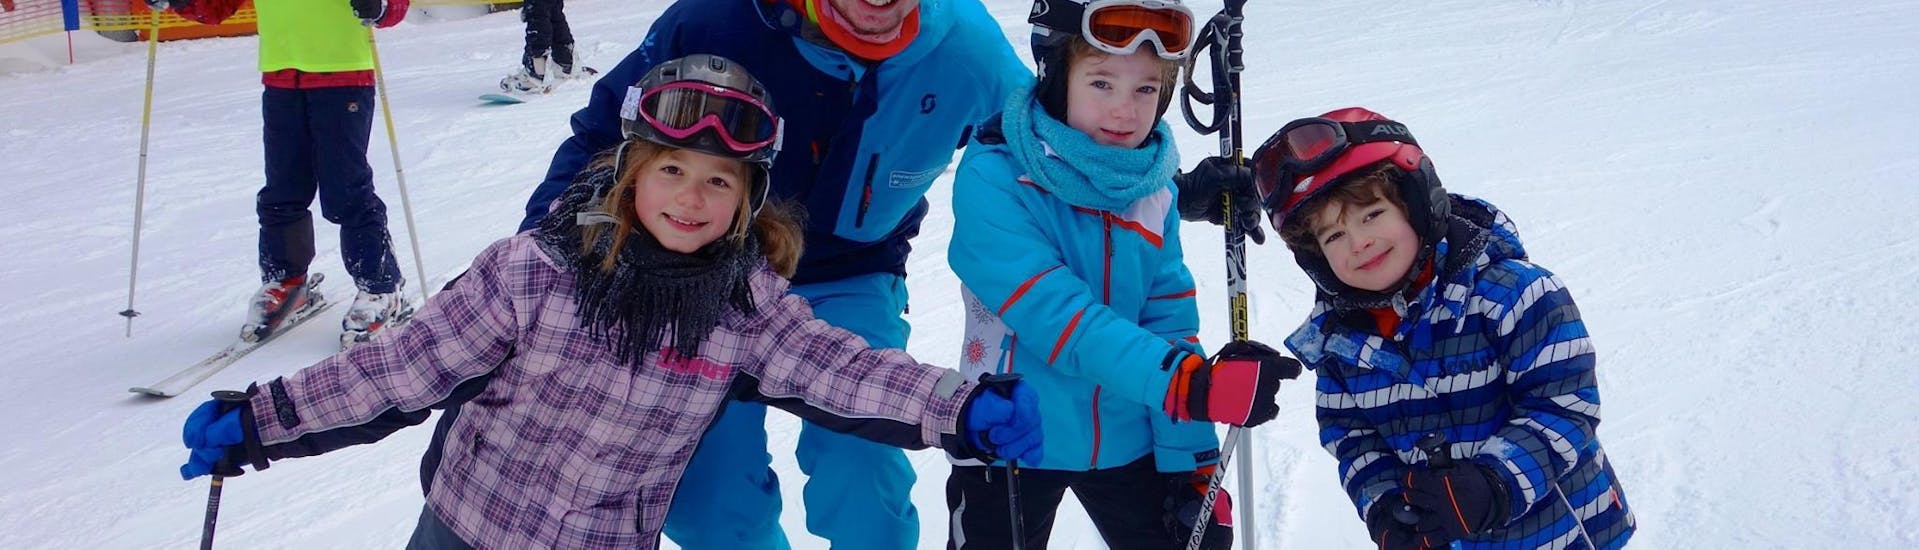 Private Ski Lessons for Families of All Levels.